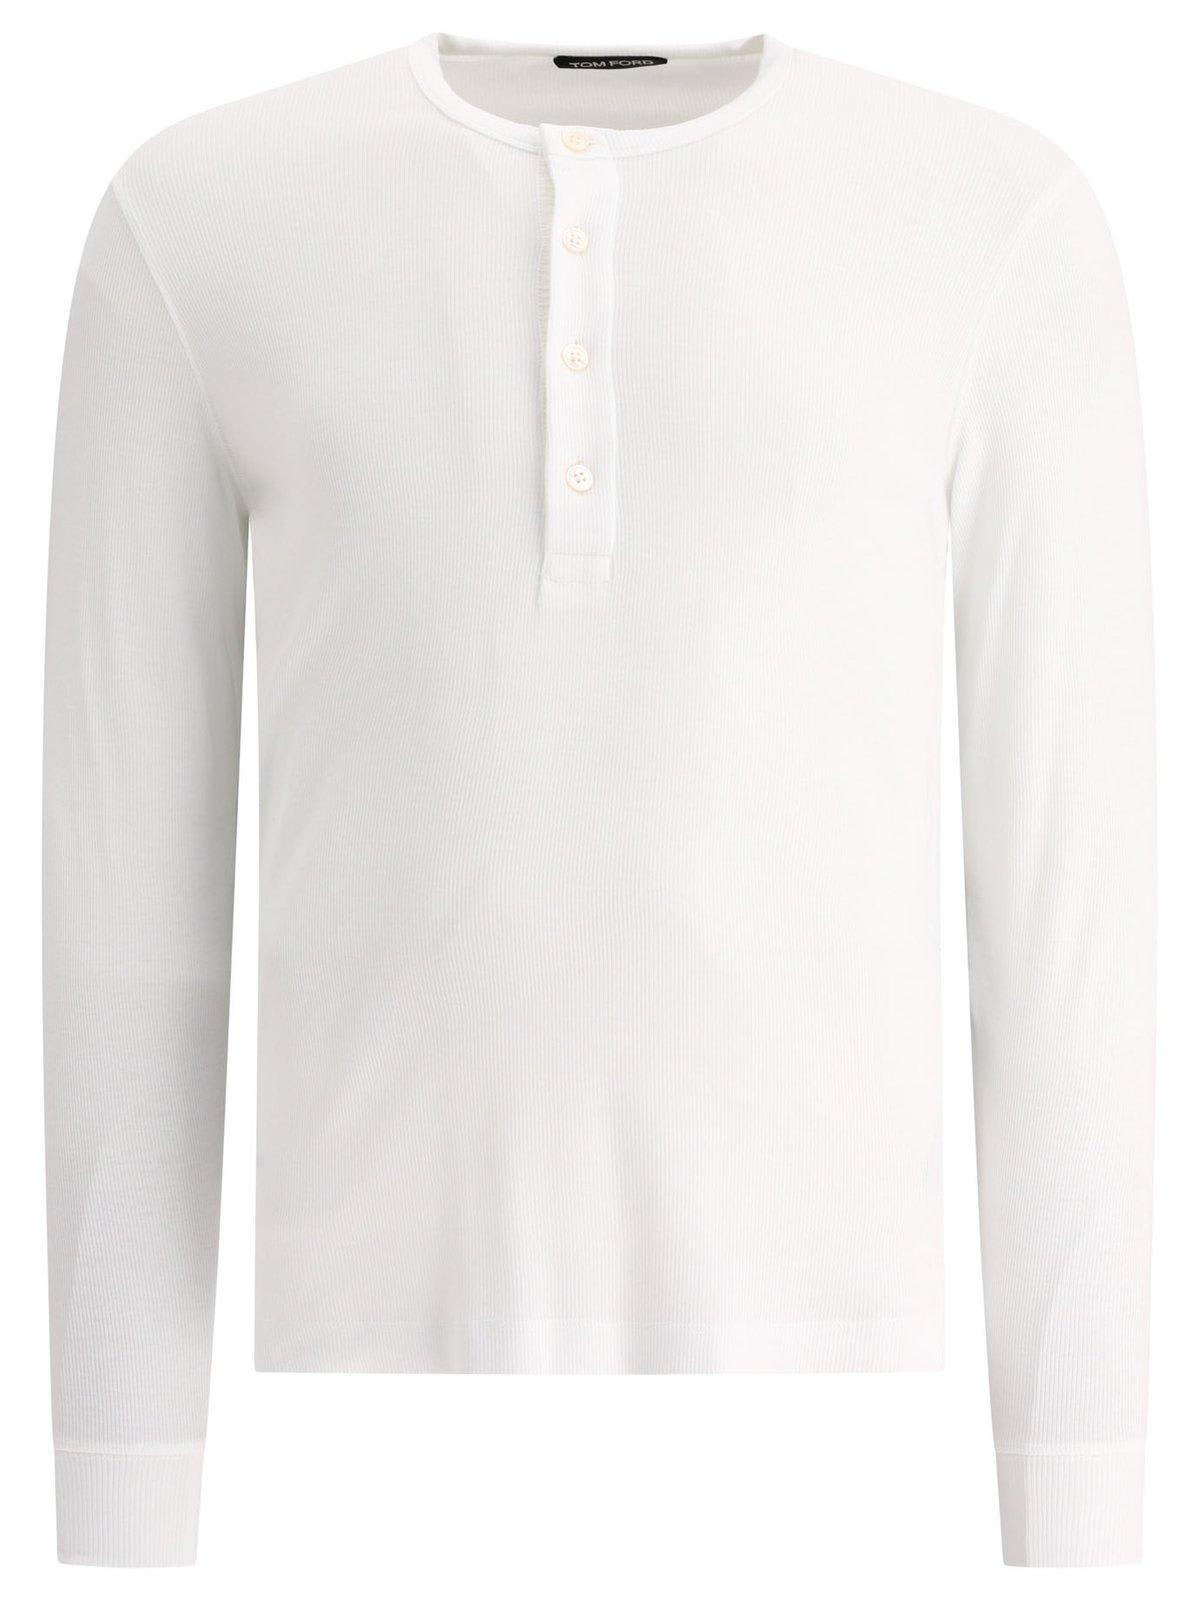 TOM FORD BUTTONED LONG-SLEEVED T-SHIRT